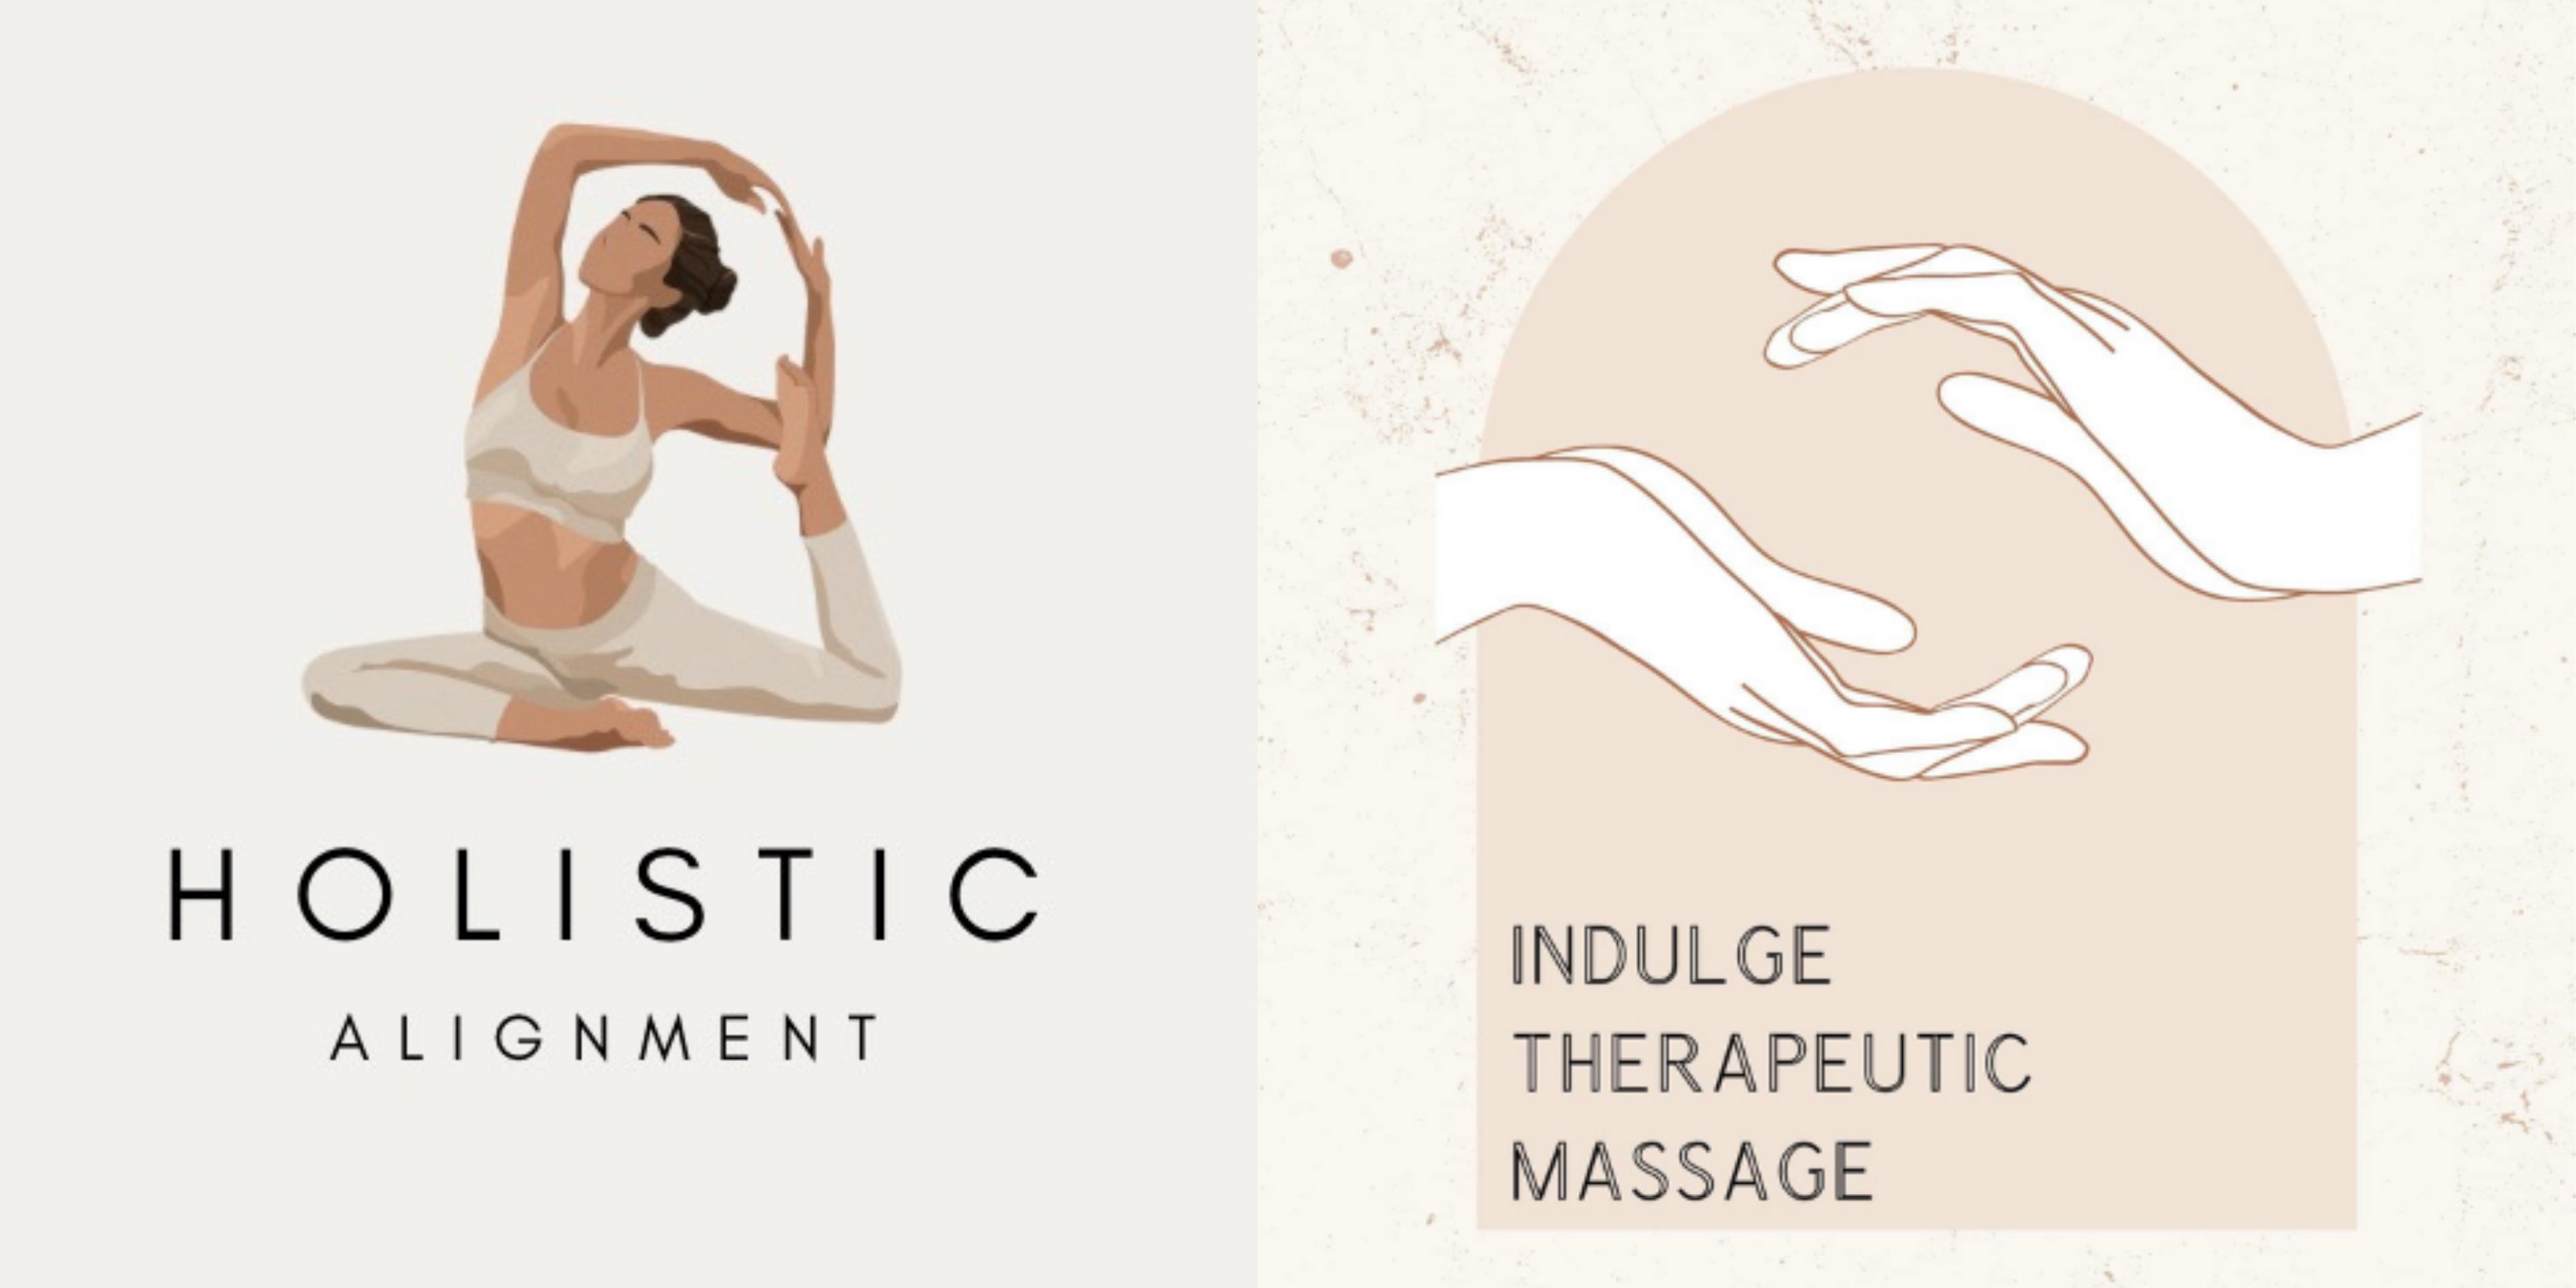 Holistic Alignment & Co and Indulge Therapeutic Massage 